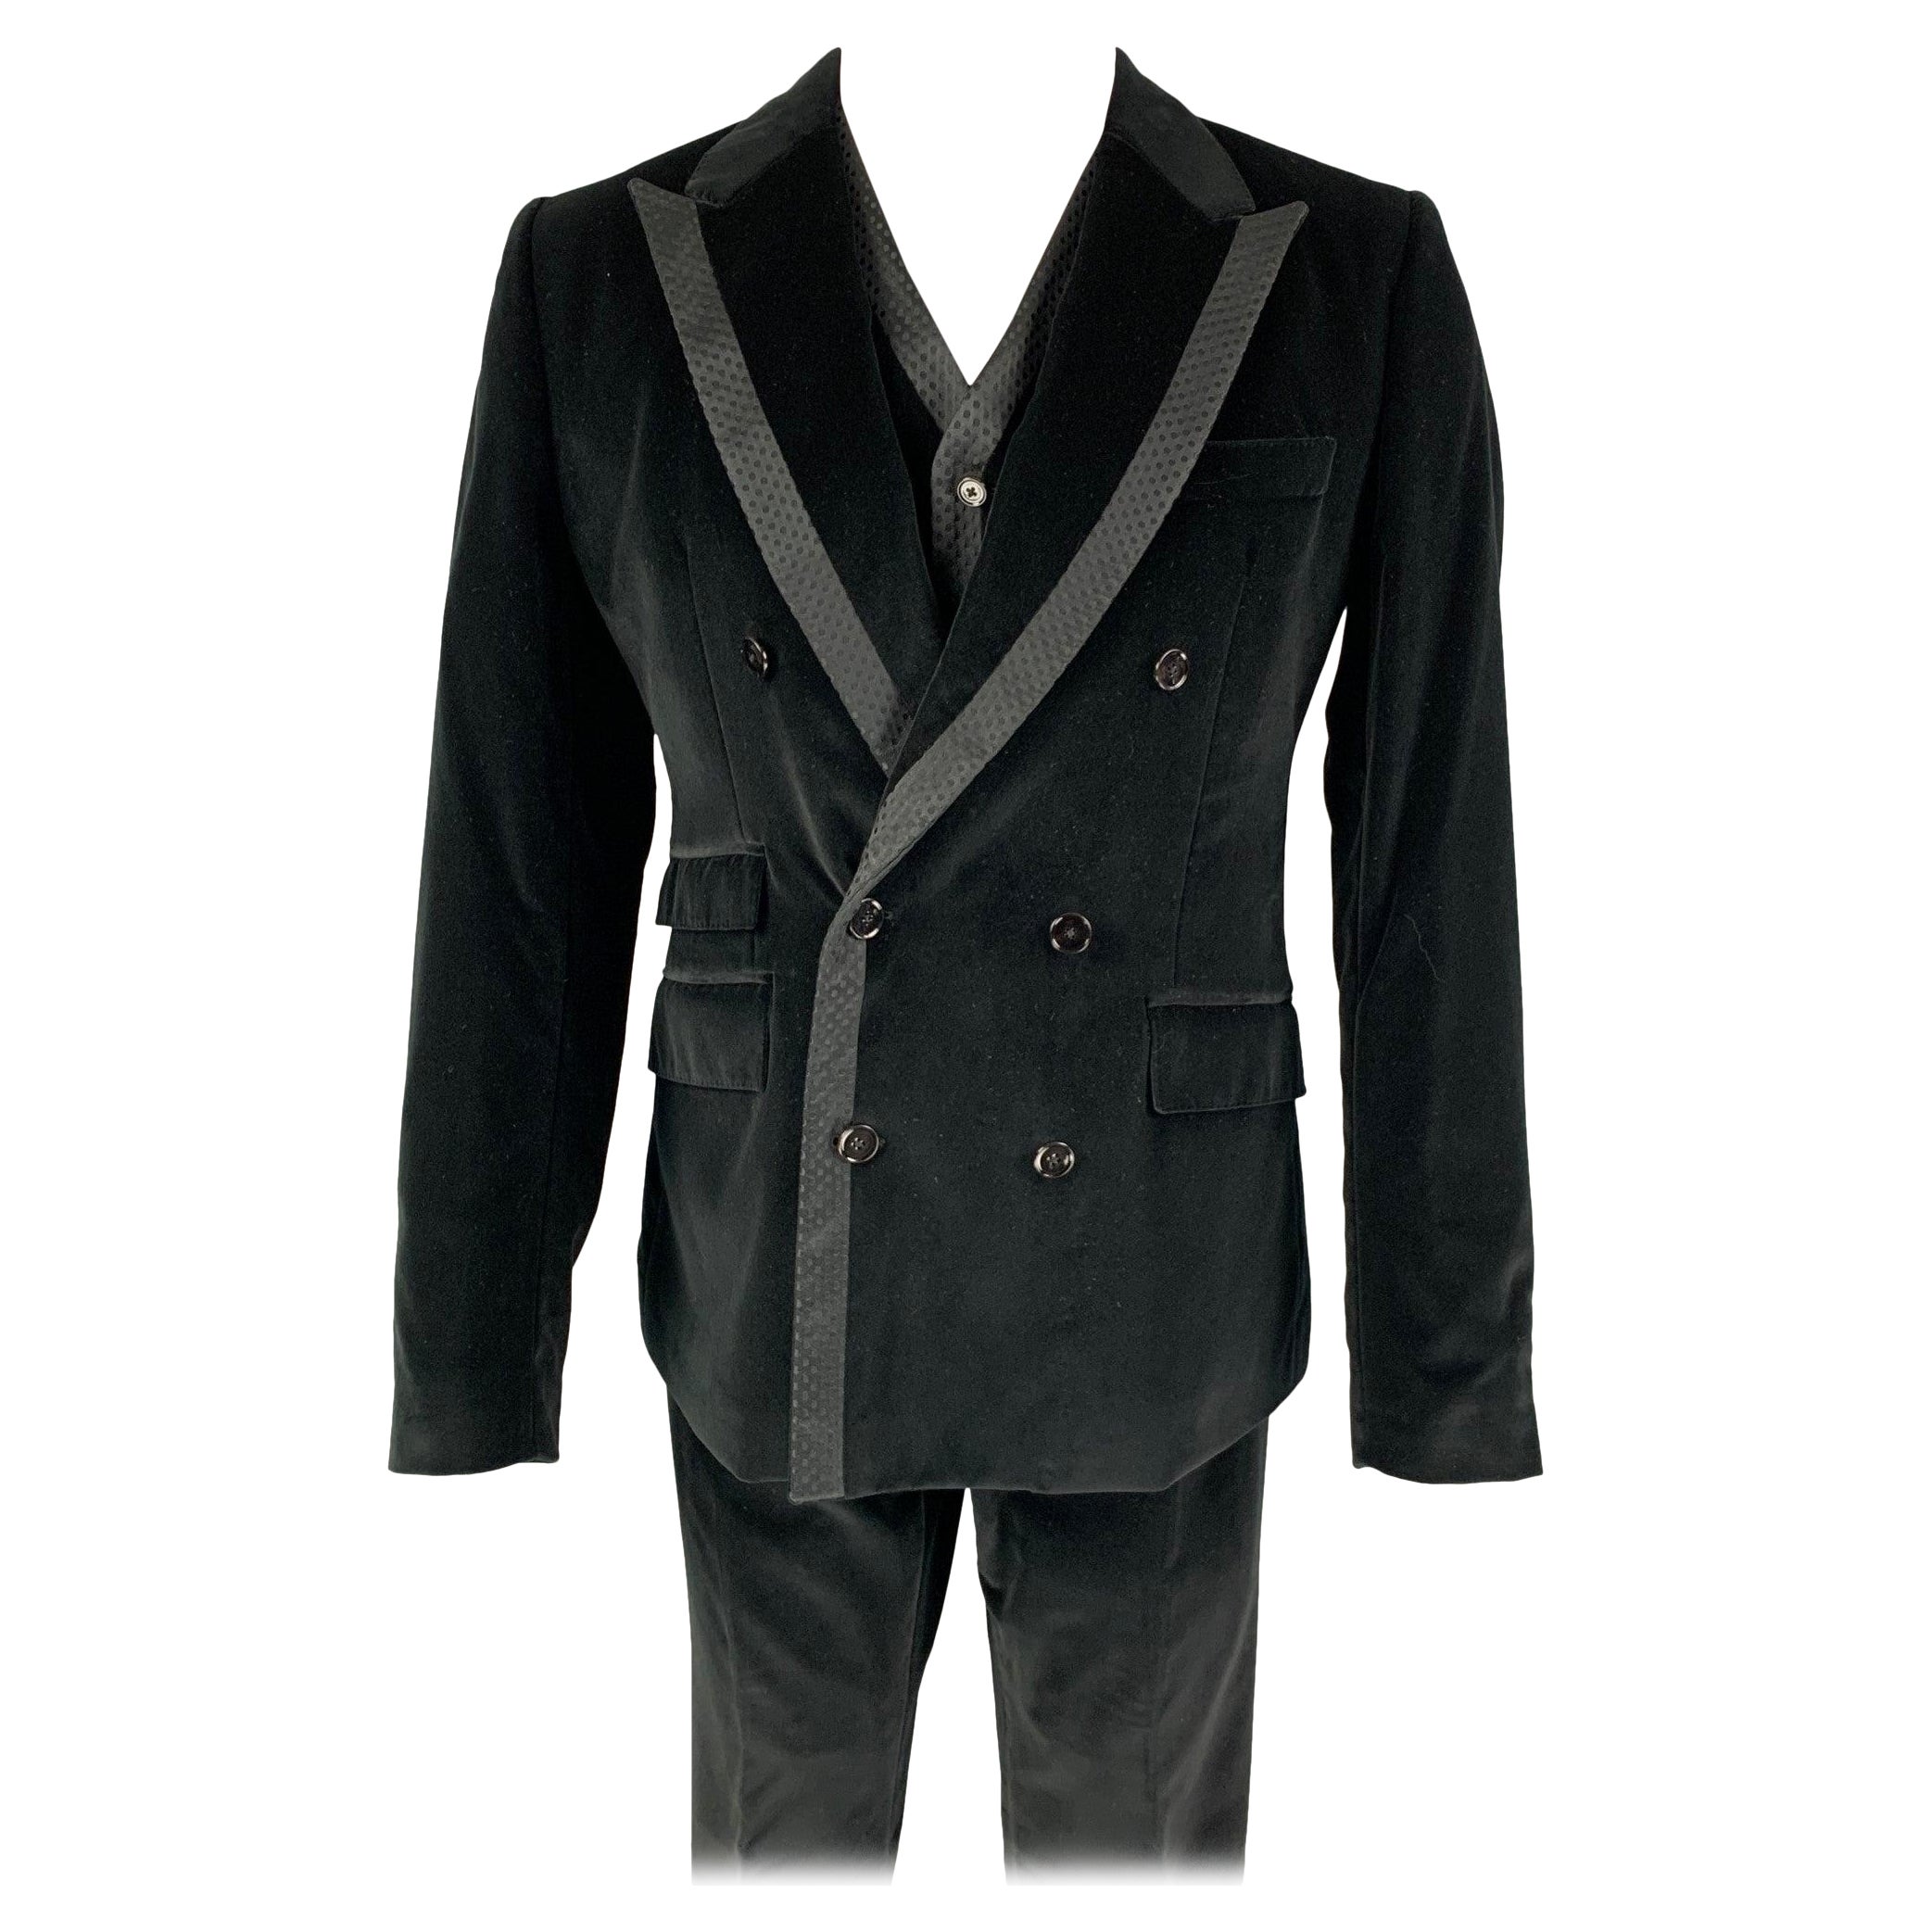 DOLCE & GABBANA Size 40 R Black Velvet Double Breasted 3 Piece Suit For Sale